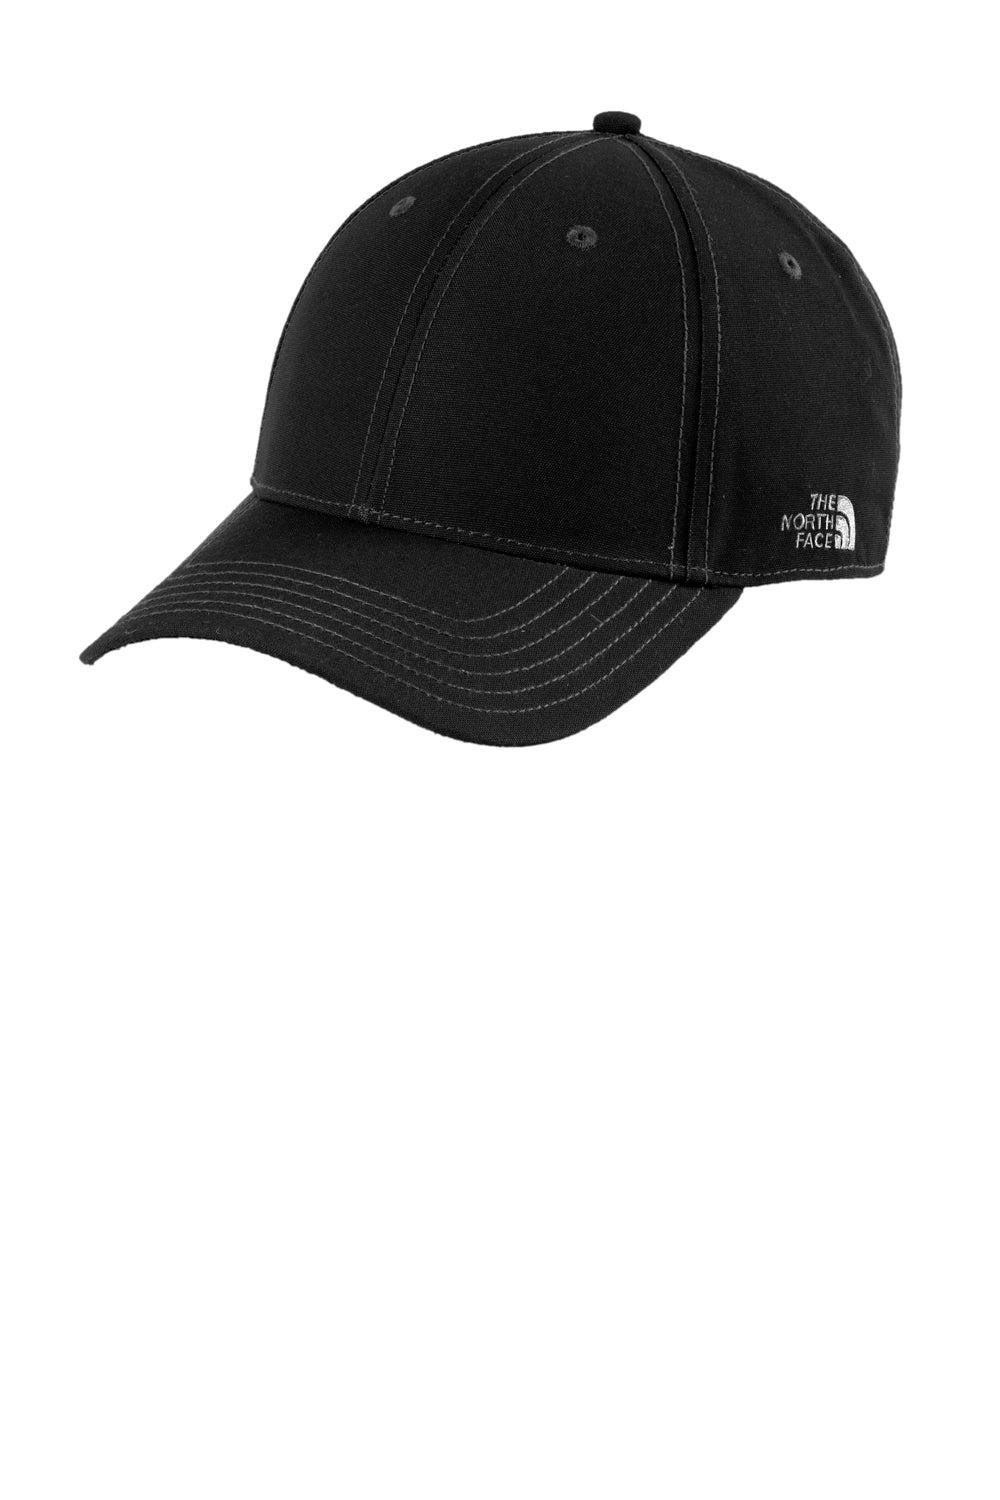 The North Face NF0A4VU9 Classic Hat Black Front